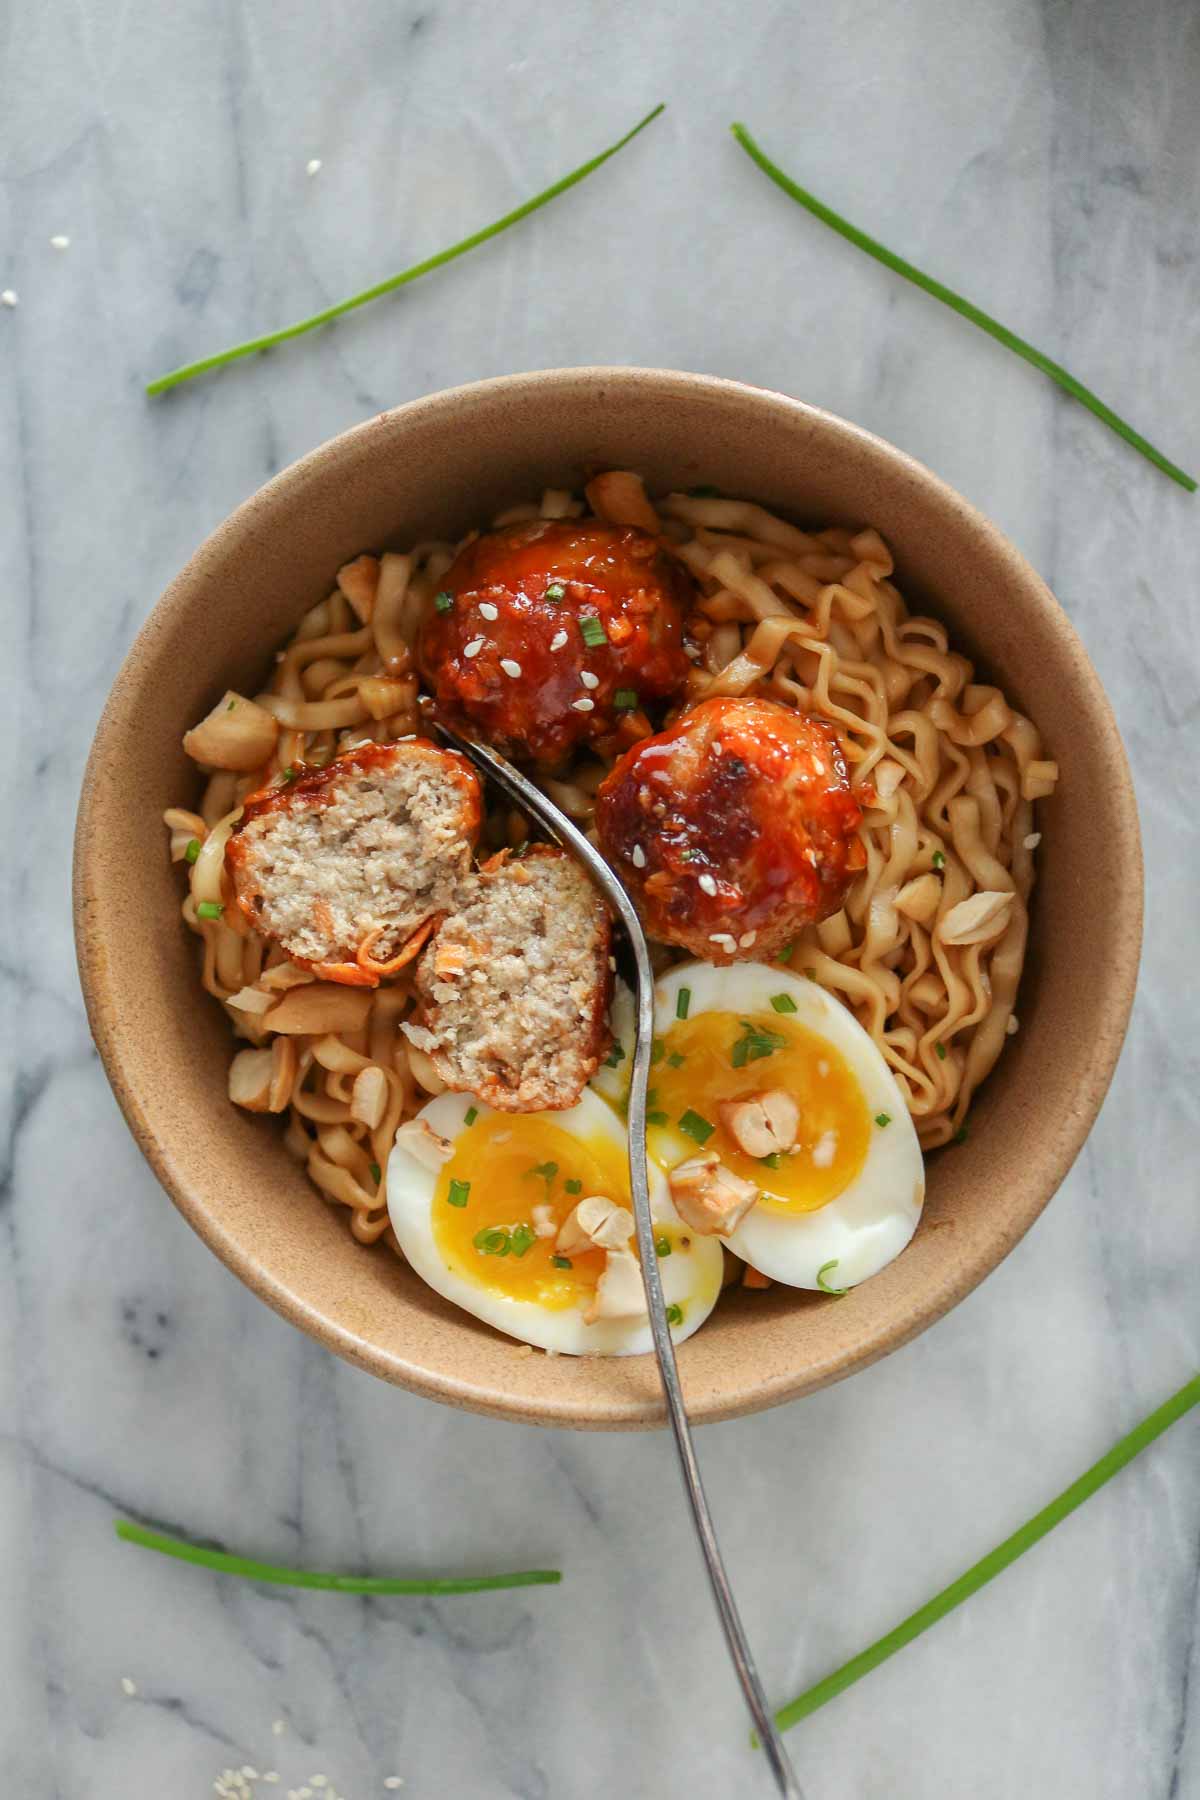 Meatballs, noodles and a jammy soft-boiled egg in a bowl with one of the meatballs cut in half.